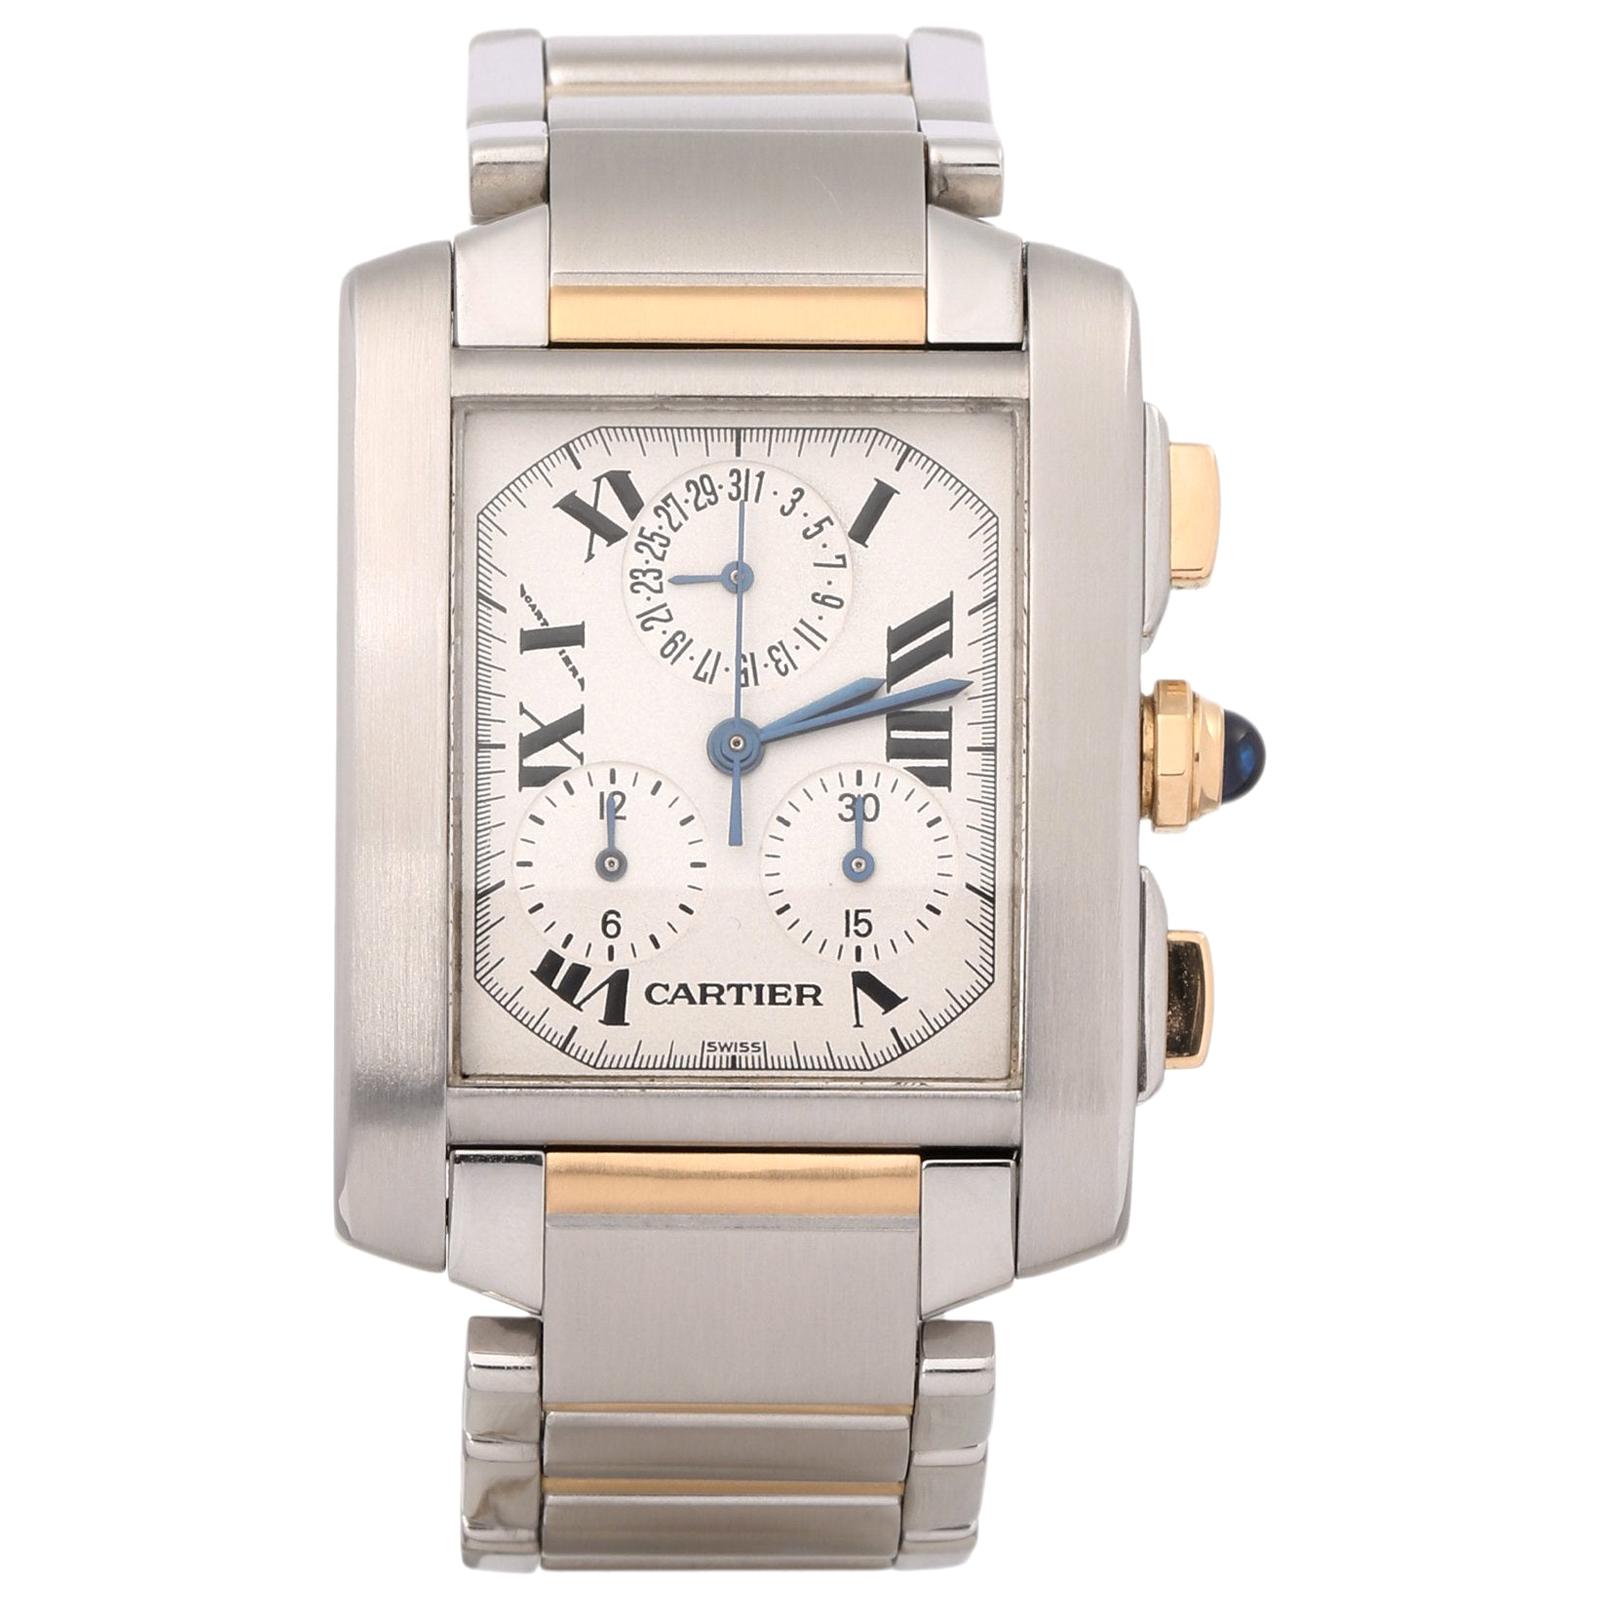 Cartier Tank Francaise W51004Q4 or 2303 Unisex Stainless Steel and Yellow Gold